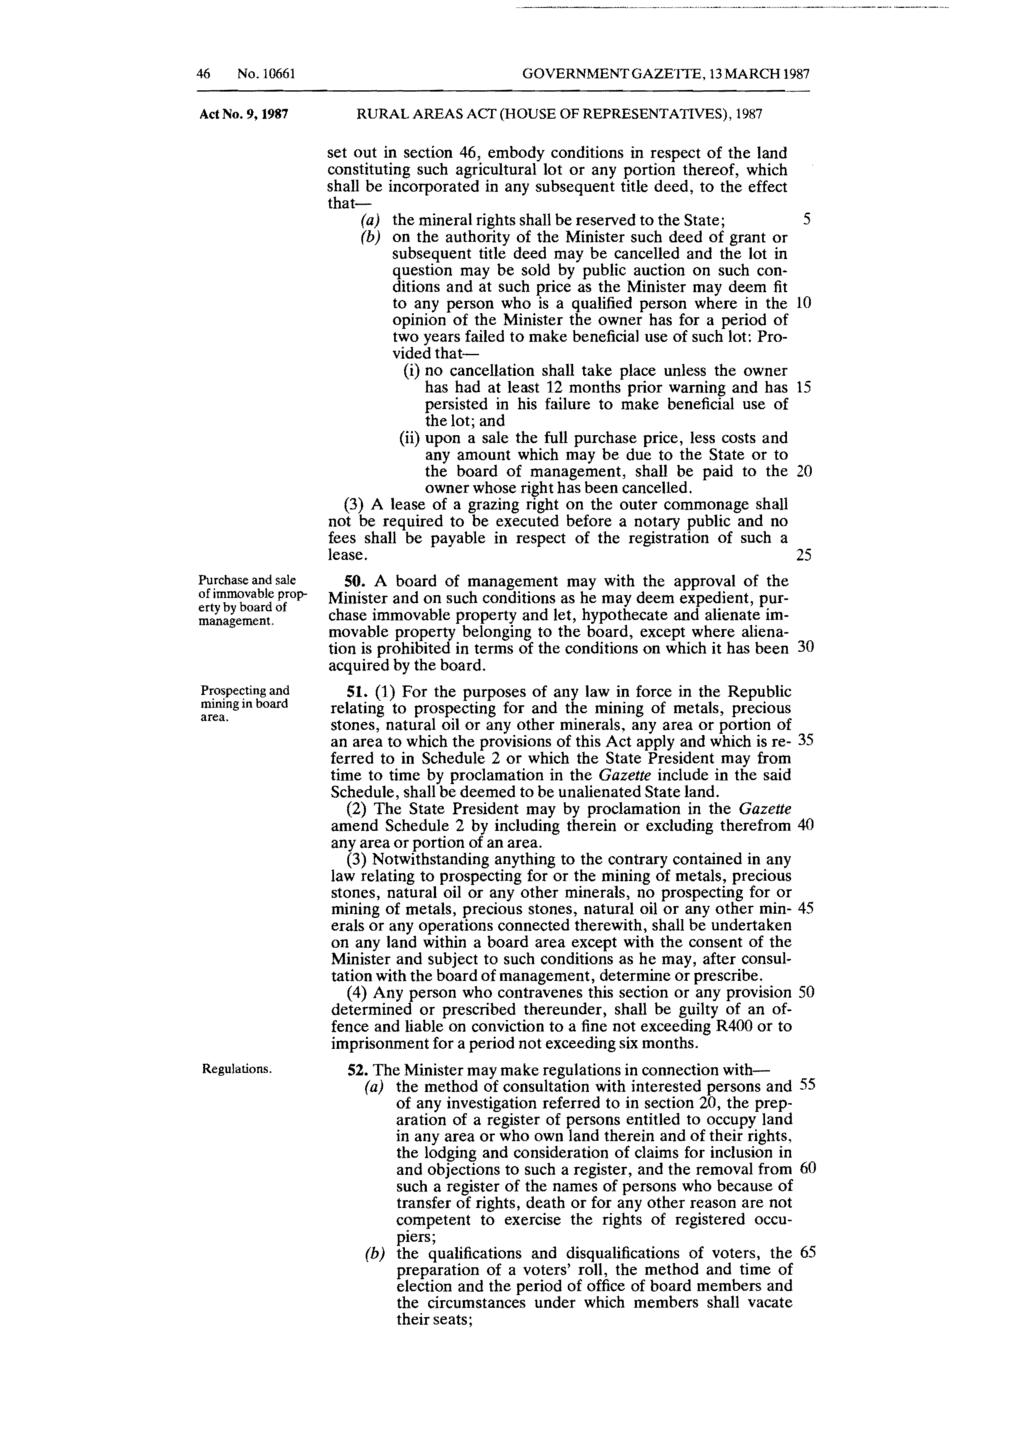 46 No. 661 GOVERNMENT GAZETTE, 13 MARCH 1987 Act No.9, 1987 Pu rchase and sale of immovable property by board of management. Prospecting and mining in board area. Regulations.